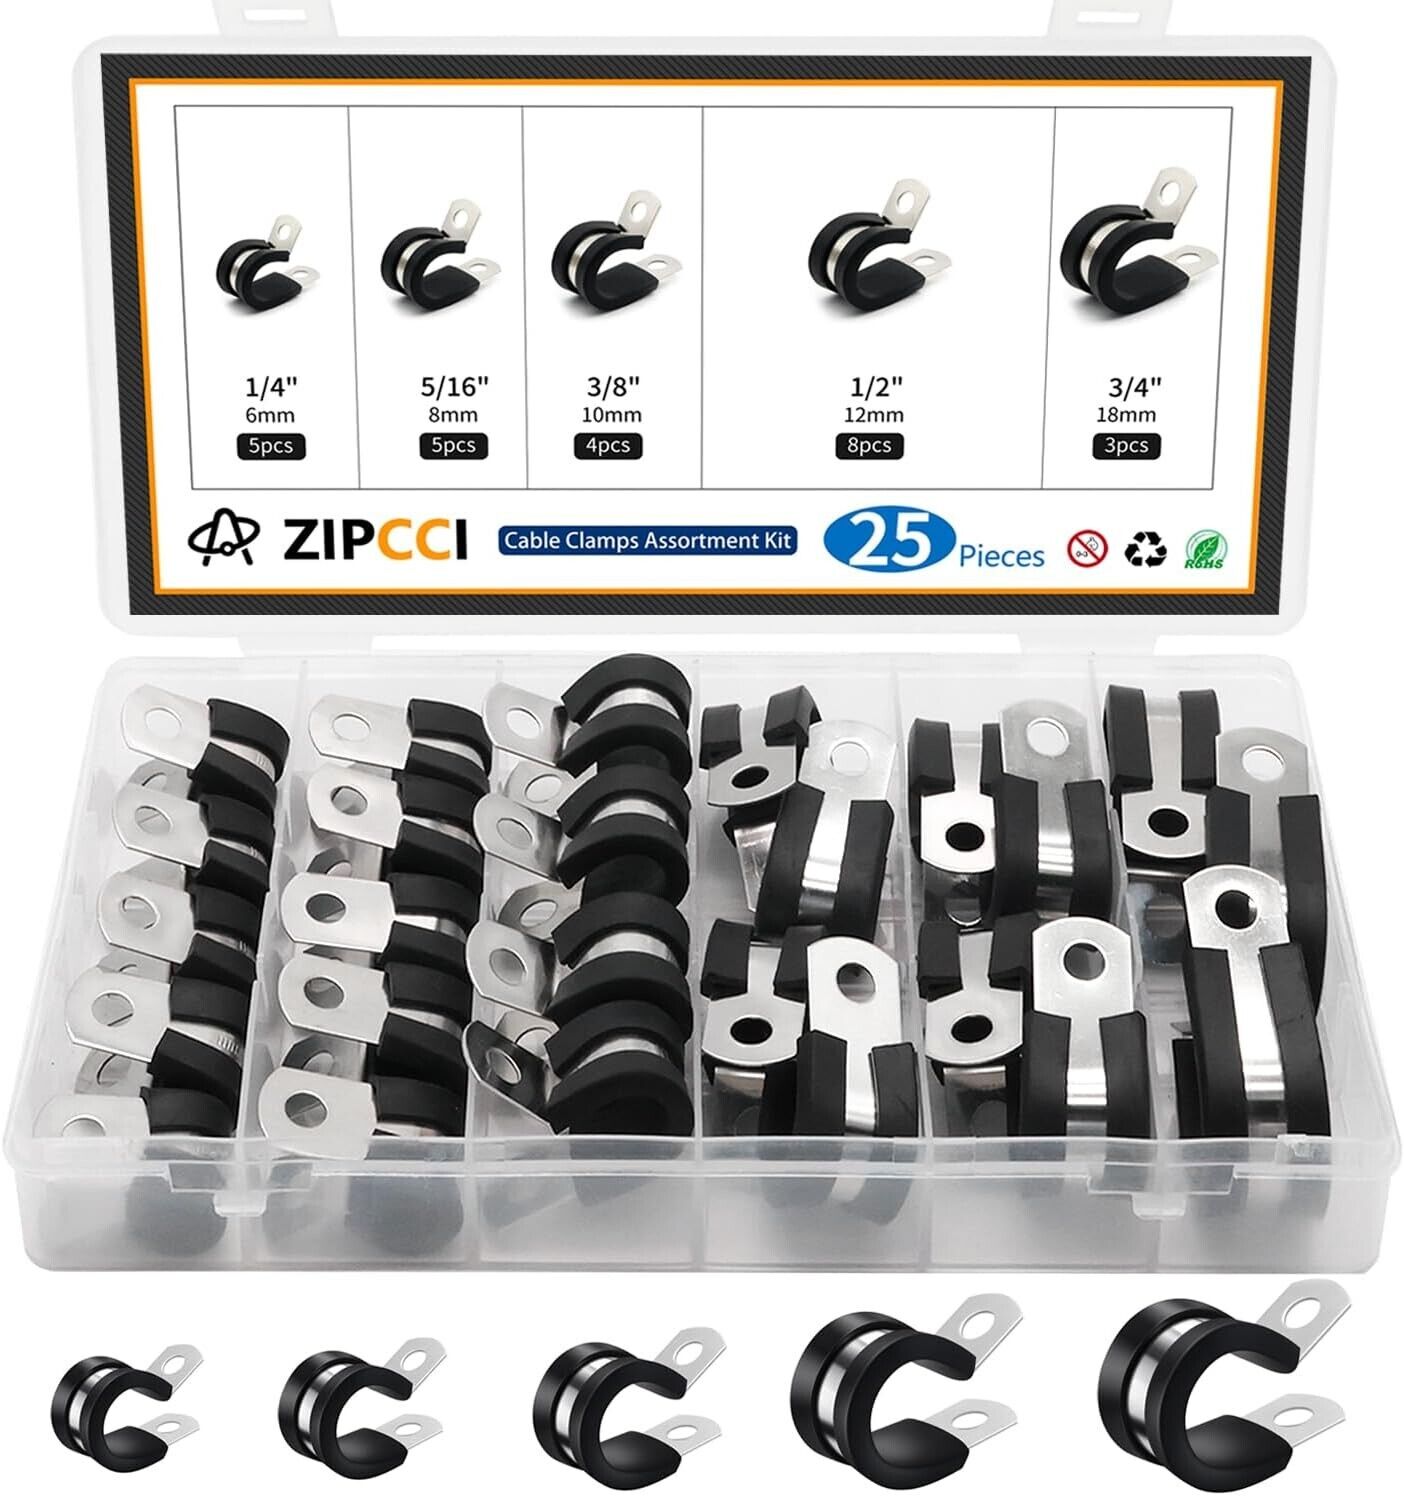 Cable Clamps Assortment Kit, 25 Pack Stainless Steel Rubber Cushion Pipe Clips